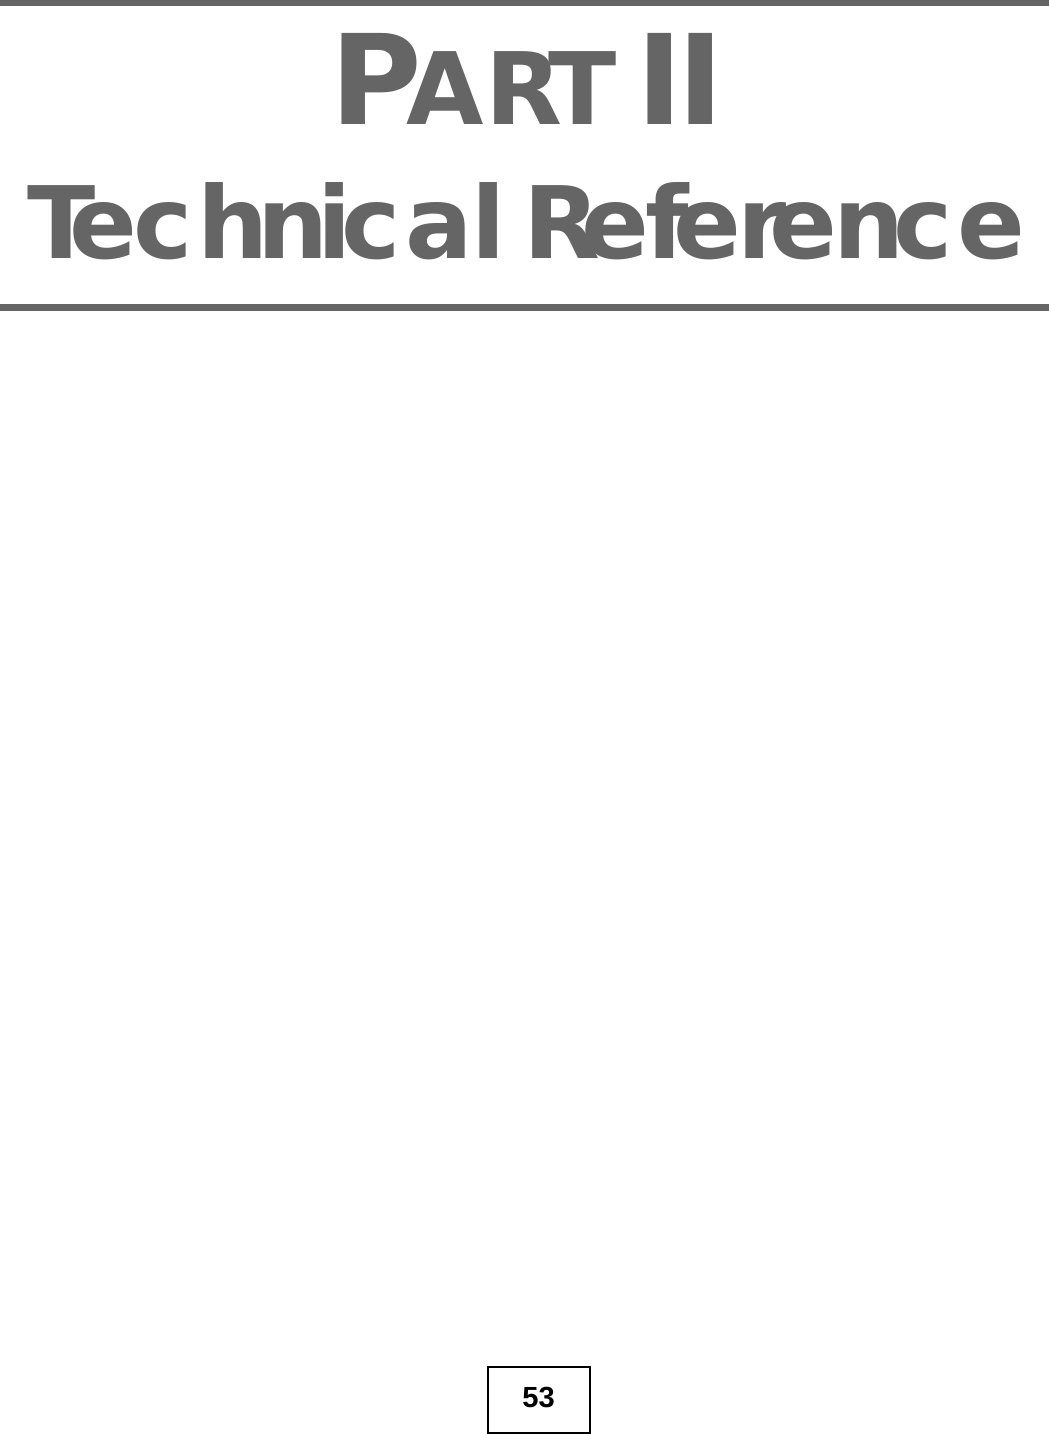 53PART IITechnical Reference